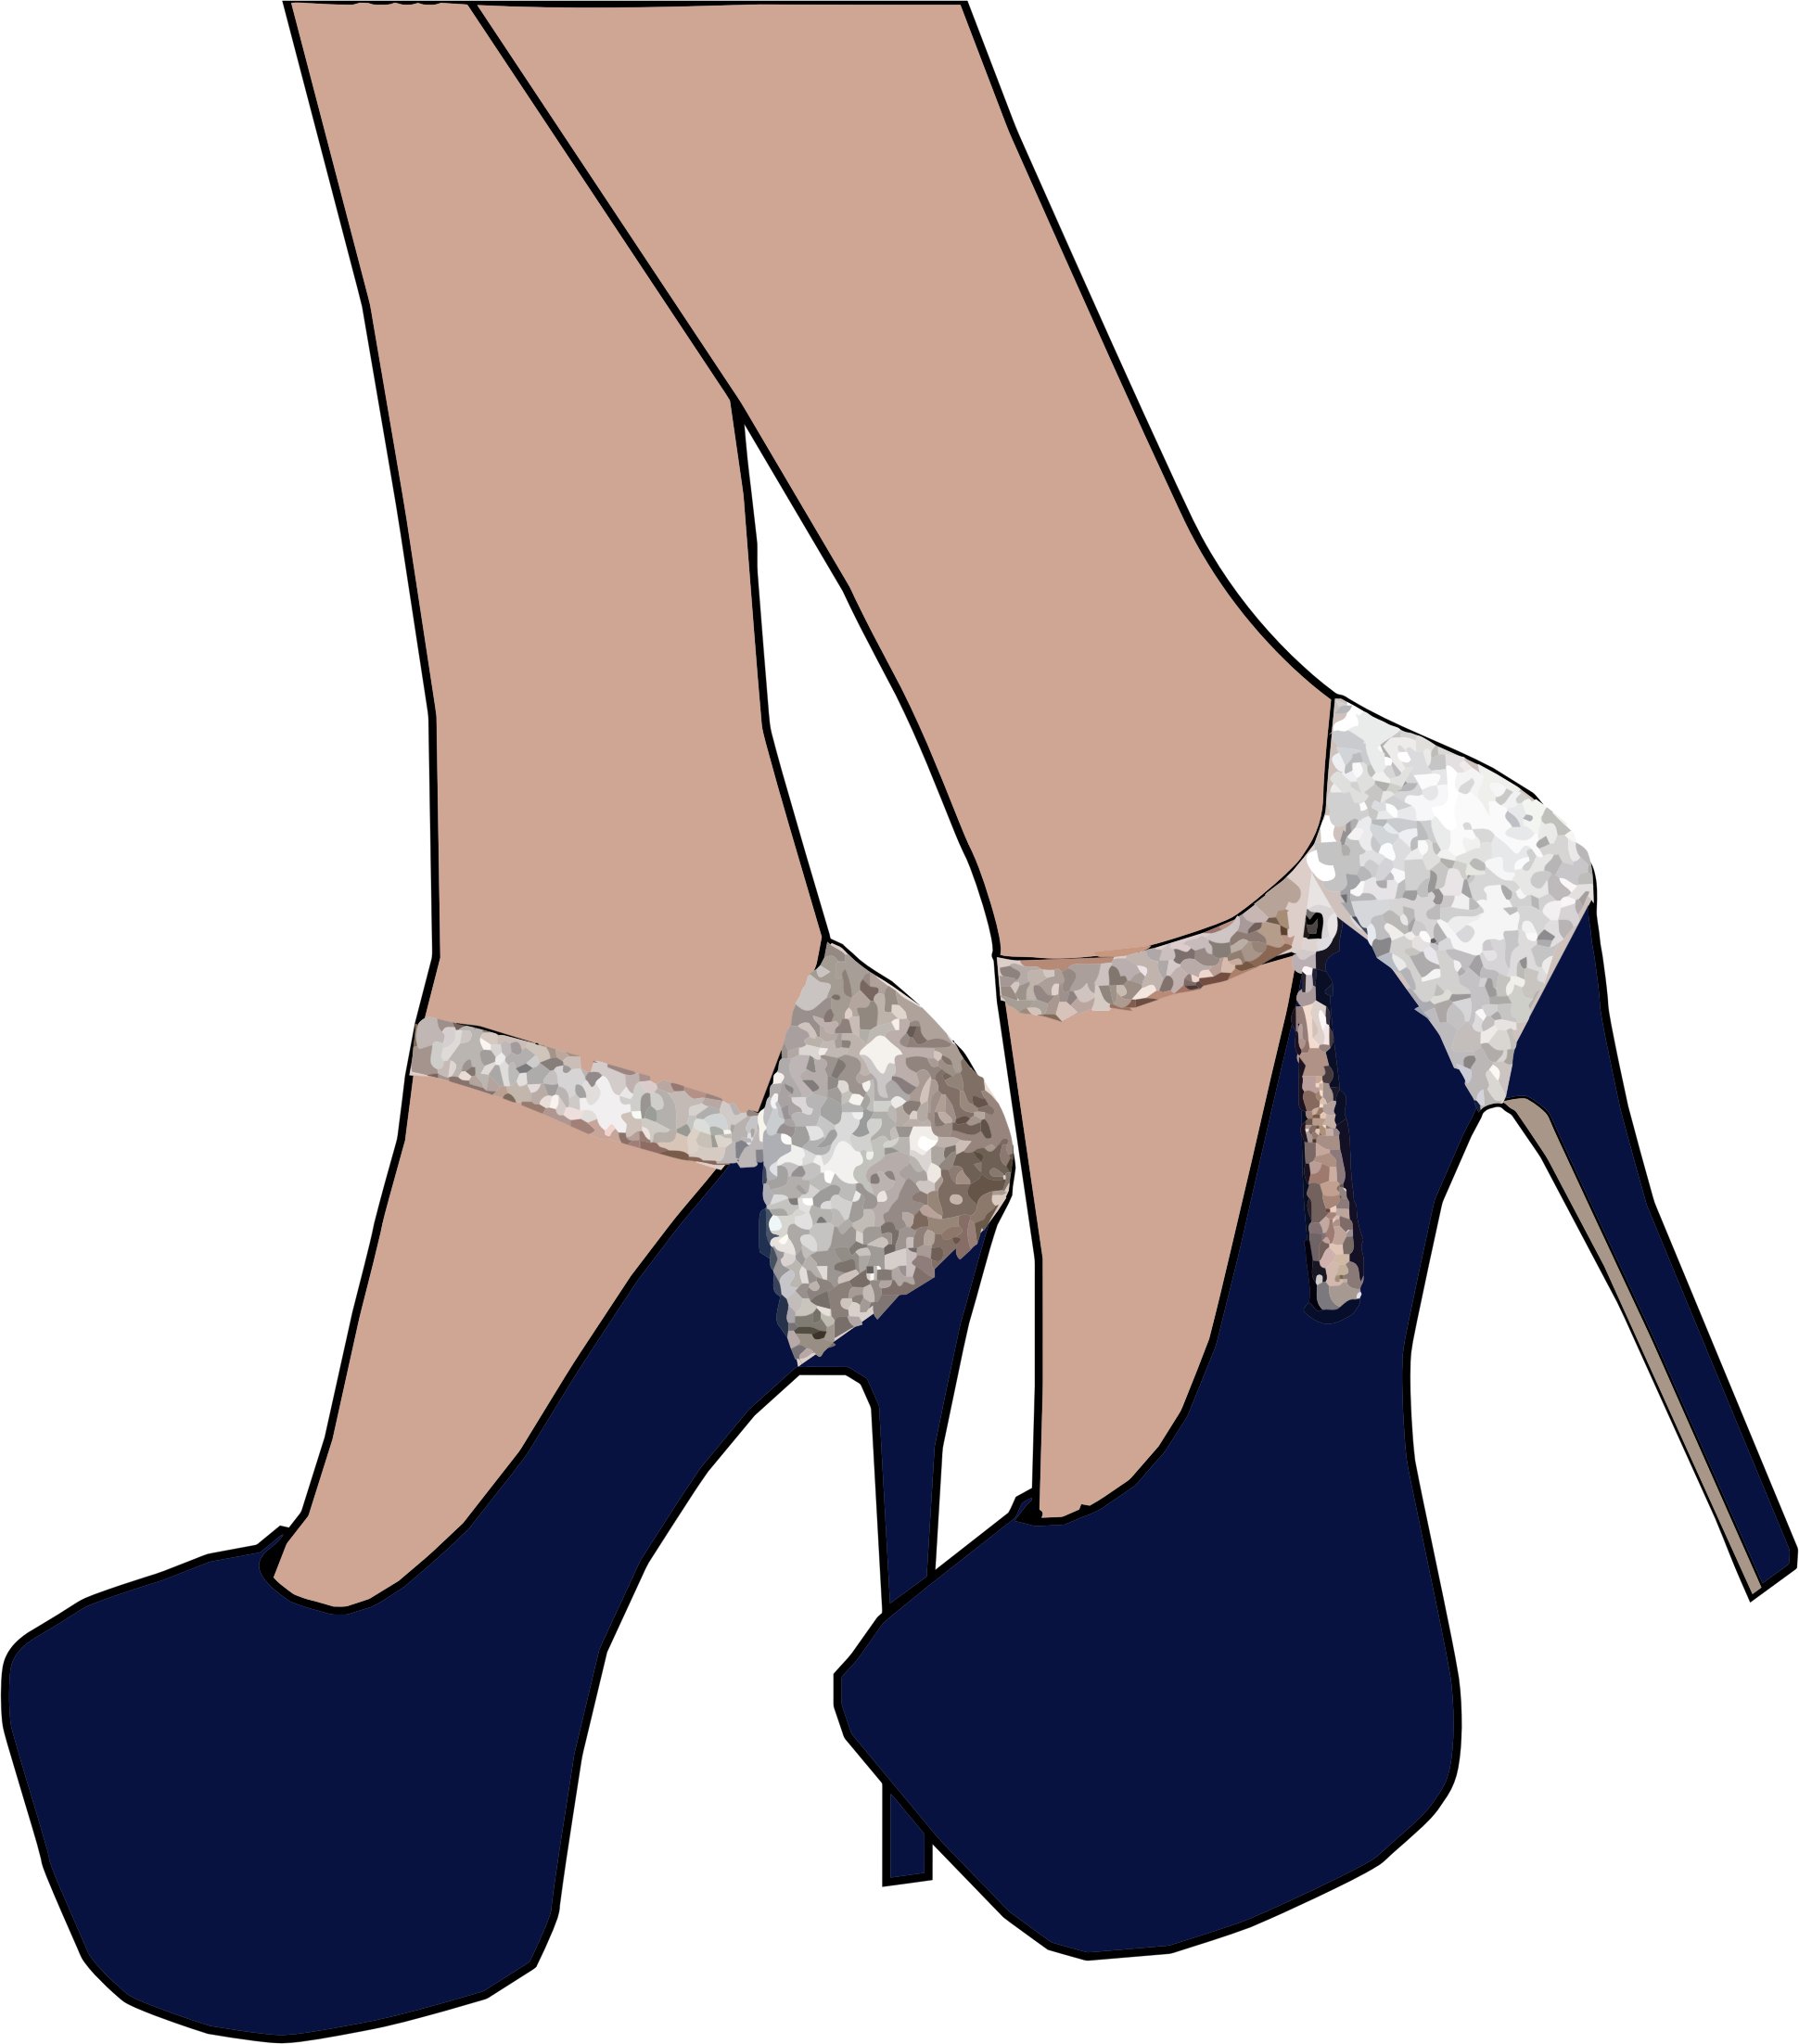 Sparkly High Heel Shoes Vector Clipart Image Free Stock Photo | My XXX ...